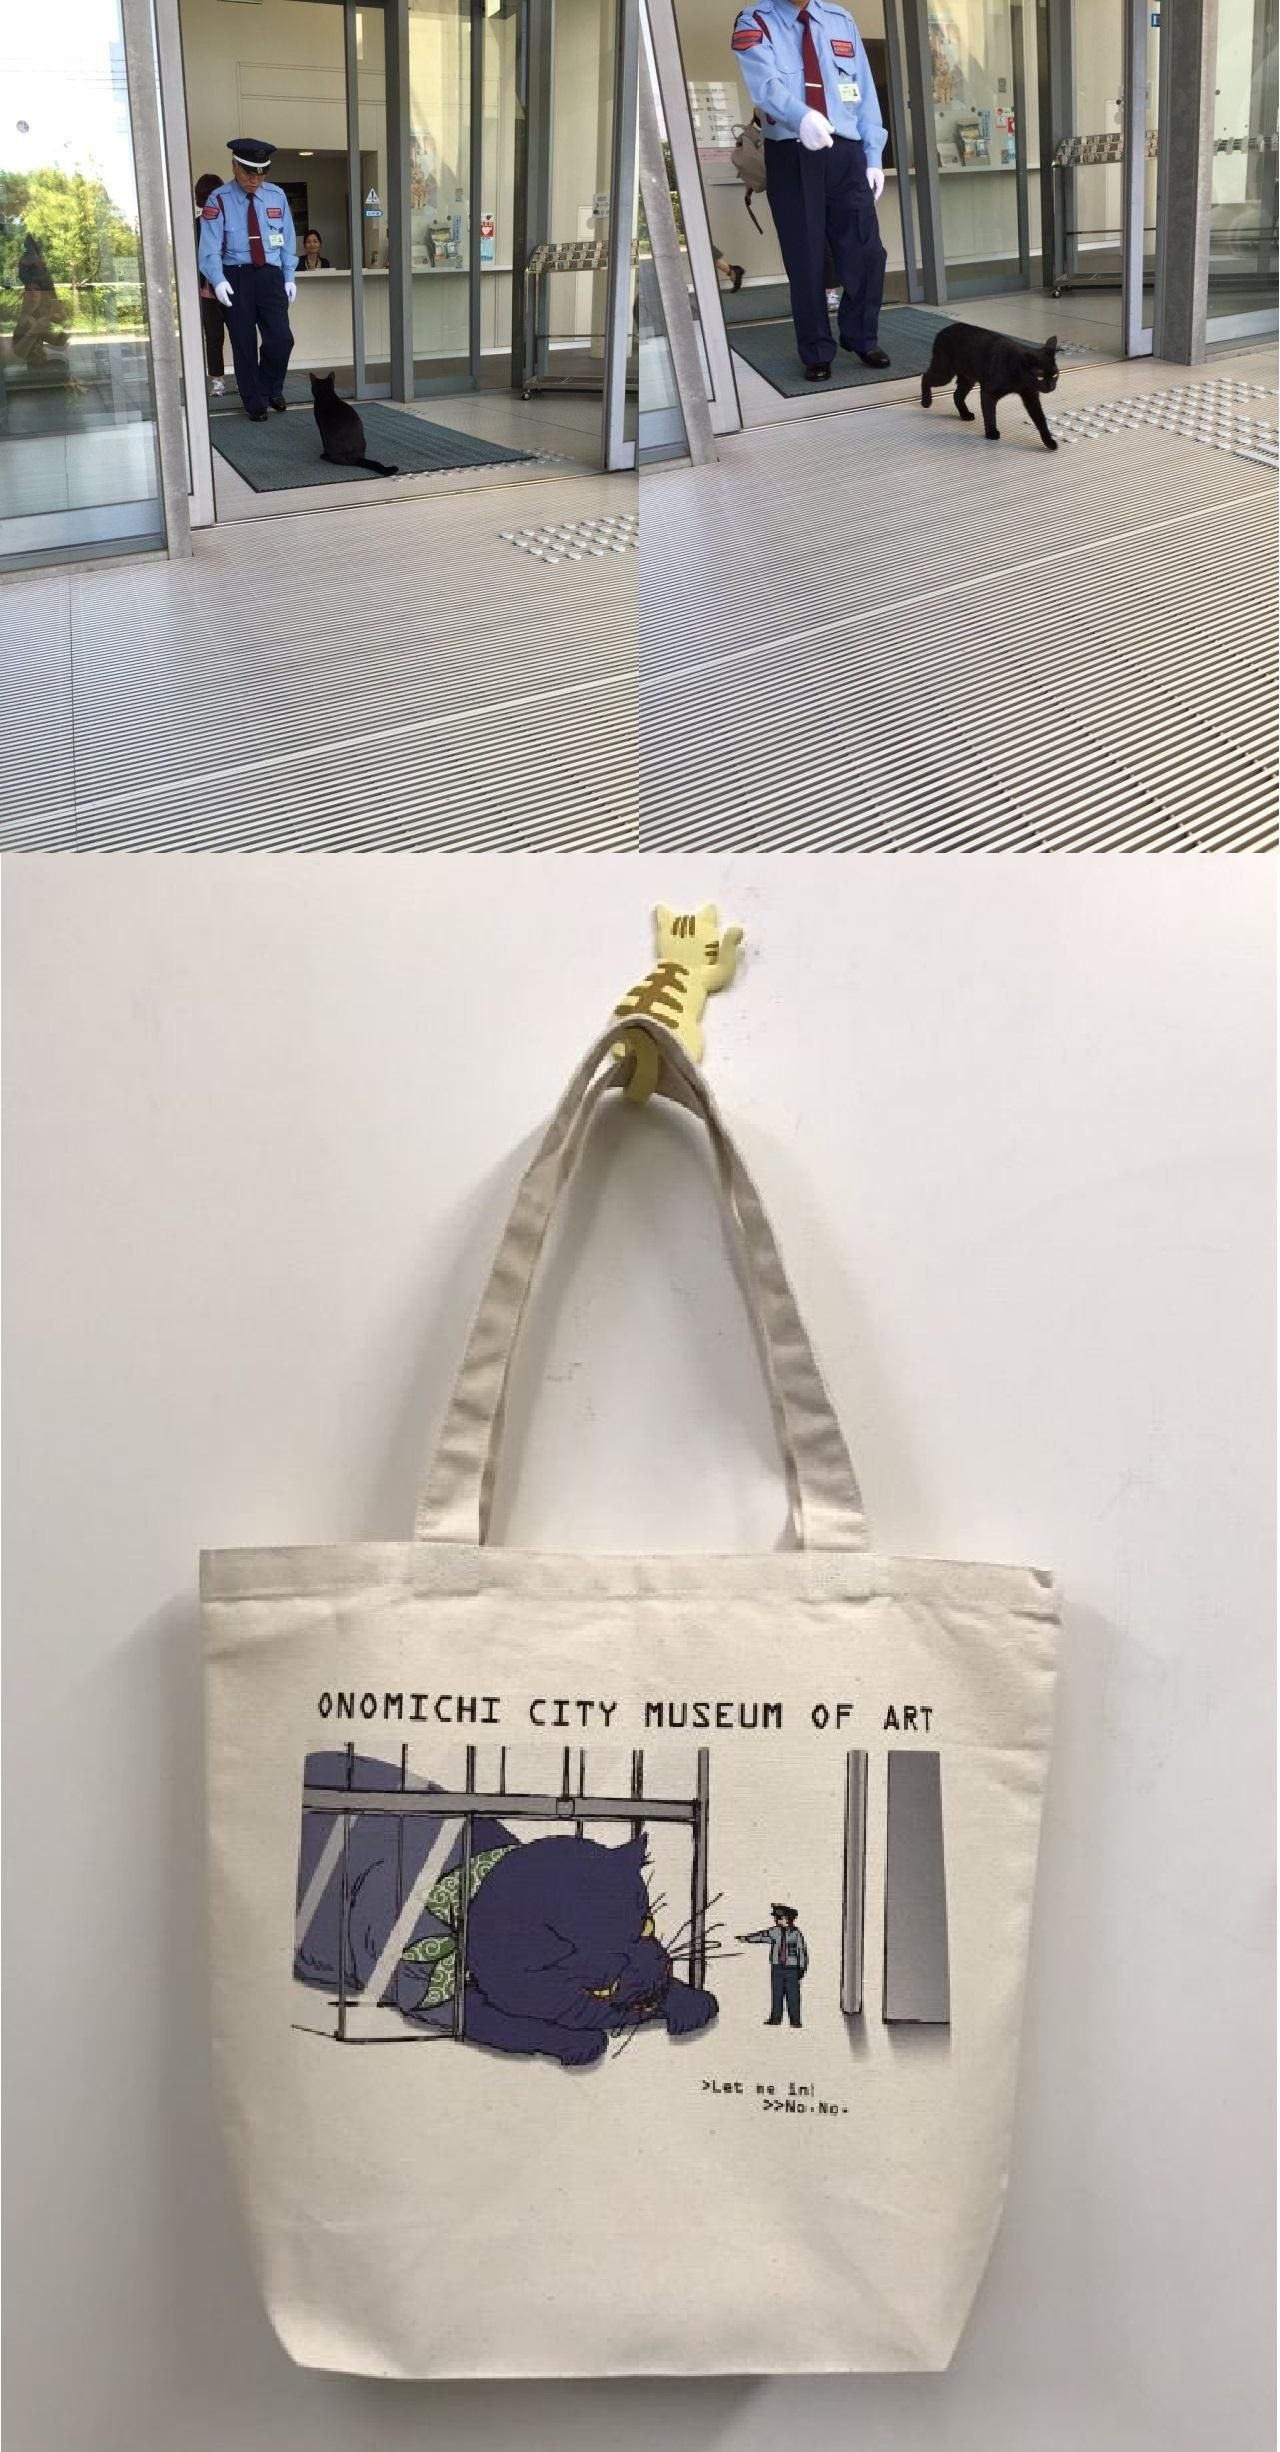 A cat who tried to get into a Japanese art museum is now immortalised on a tote bag in their gift shop.